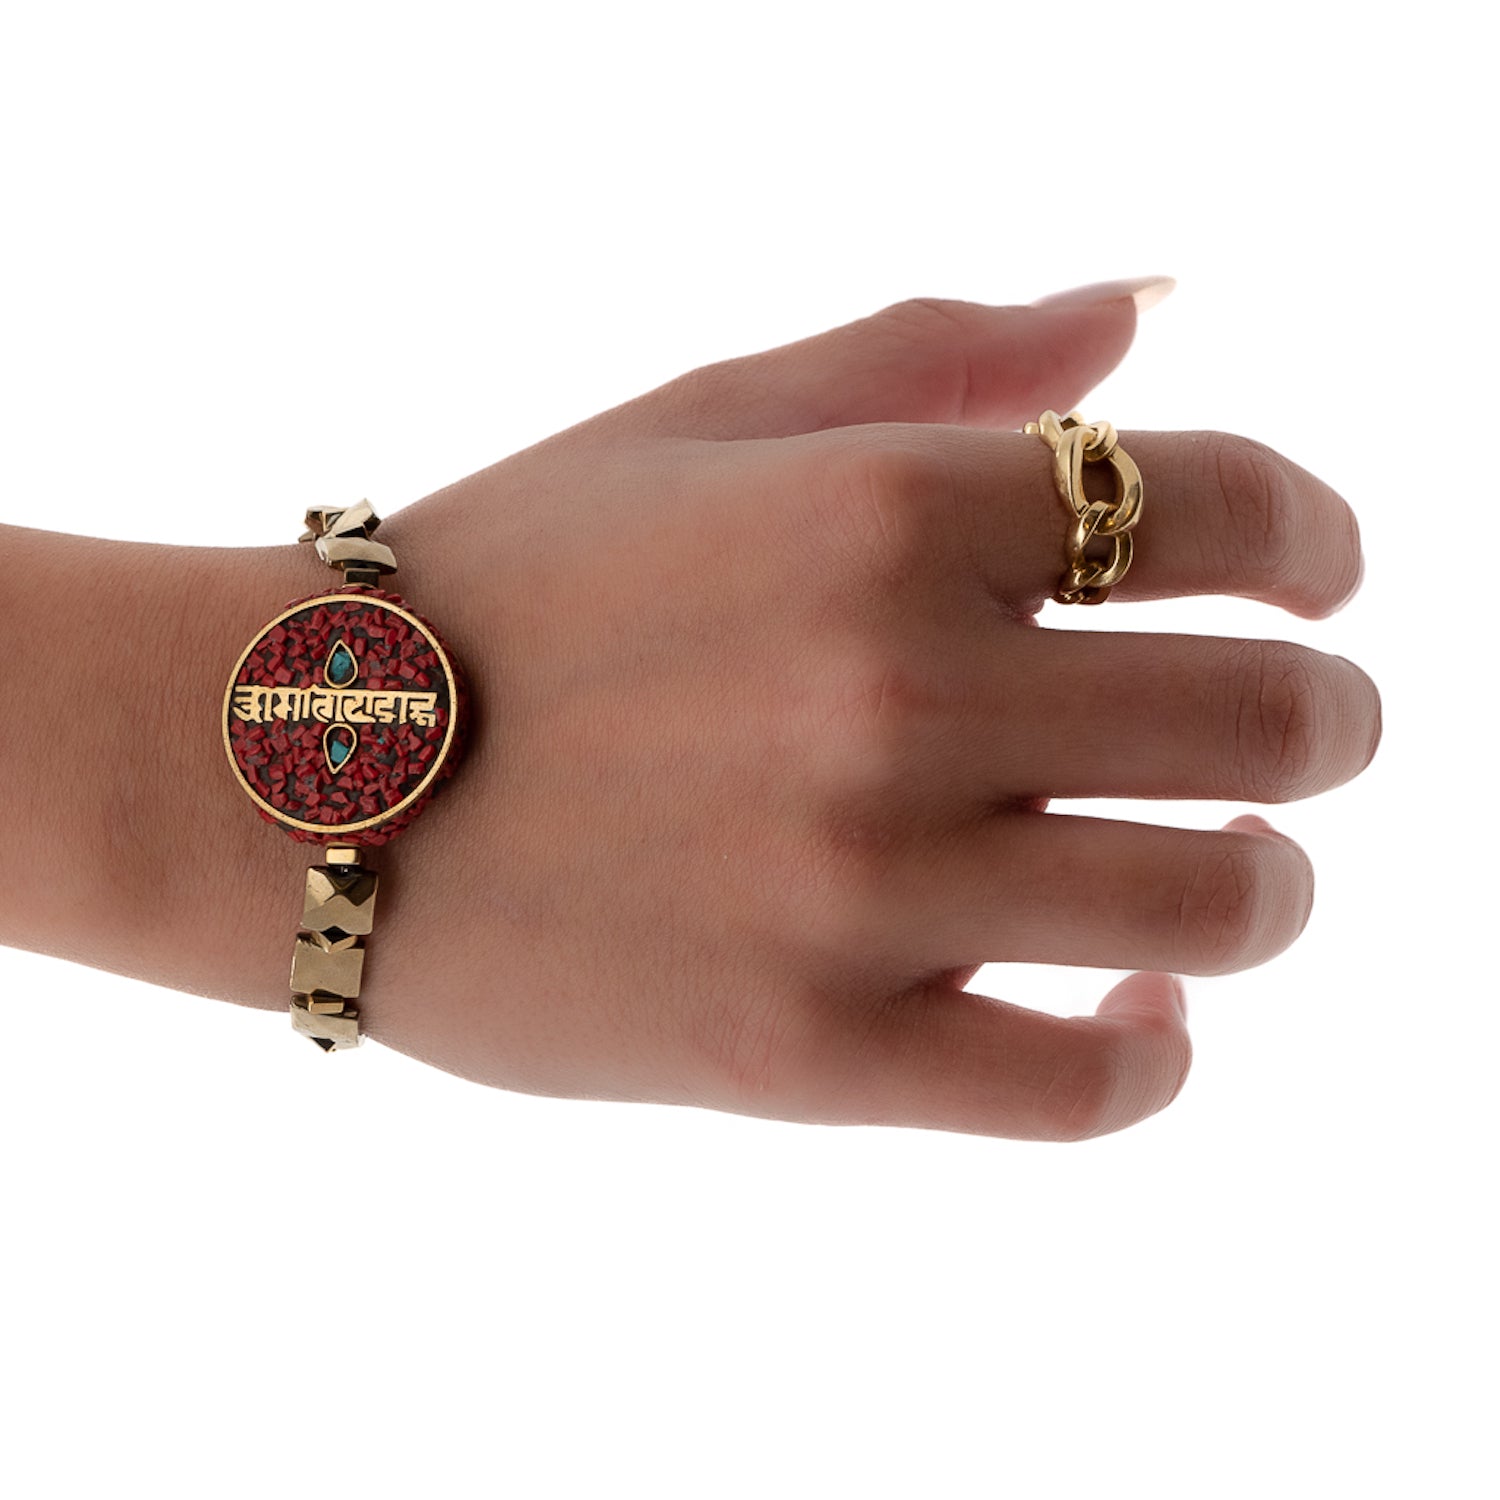 The hand model wears the Om Mani Padme Hum Coral Mantra Bracelet, showcasing its spiritual symbols and stylish design.